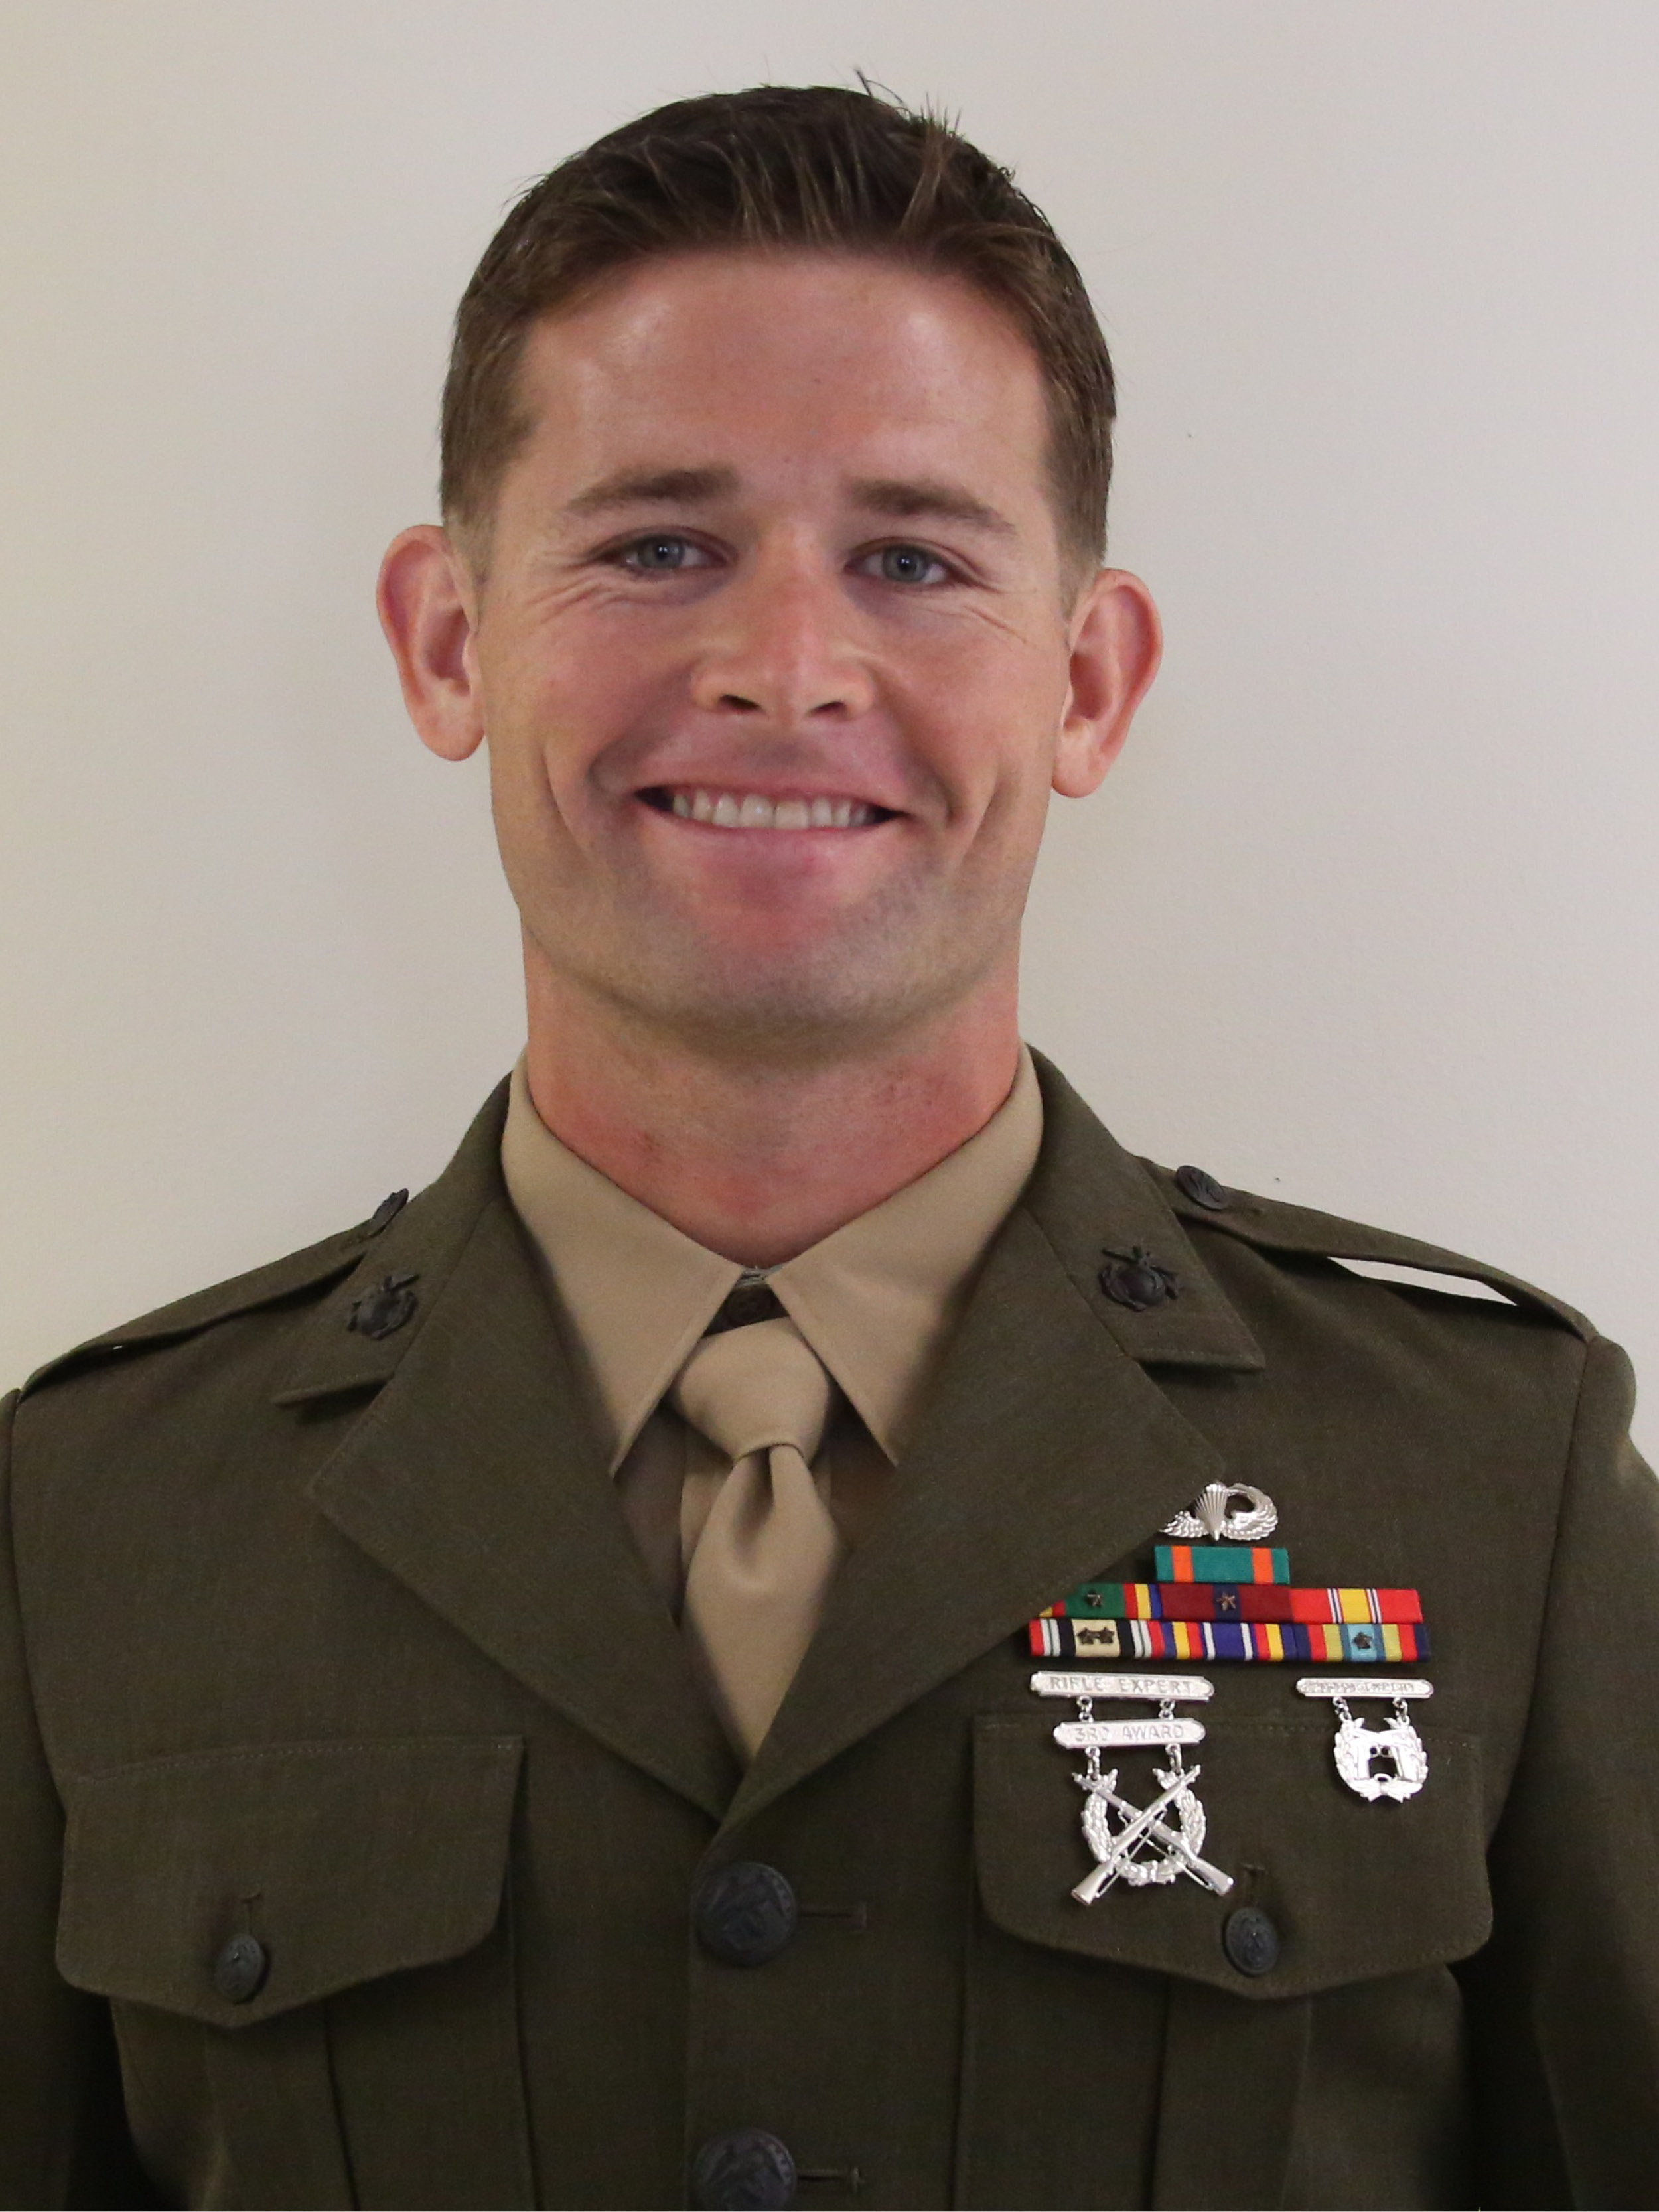 Staff Sgt. Trevor P. Blaylock died when a U.S. Army UH-60 Blackhawk Helicopter crashed near Eglin, Florida, at approximately 8:30 p.m. March 10, 2015. Blaylock, 29, a native of Lake Orion, Michigan, served within U.S. Marine Corps Forces, Special Operational Command as an element member. His personal awards include the Navy and Marine Corps Commendation Medal with Valor, Navy and Marine Corps Achievement Medal and Combat Action ribbon.